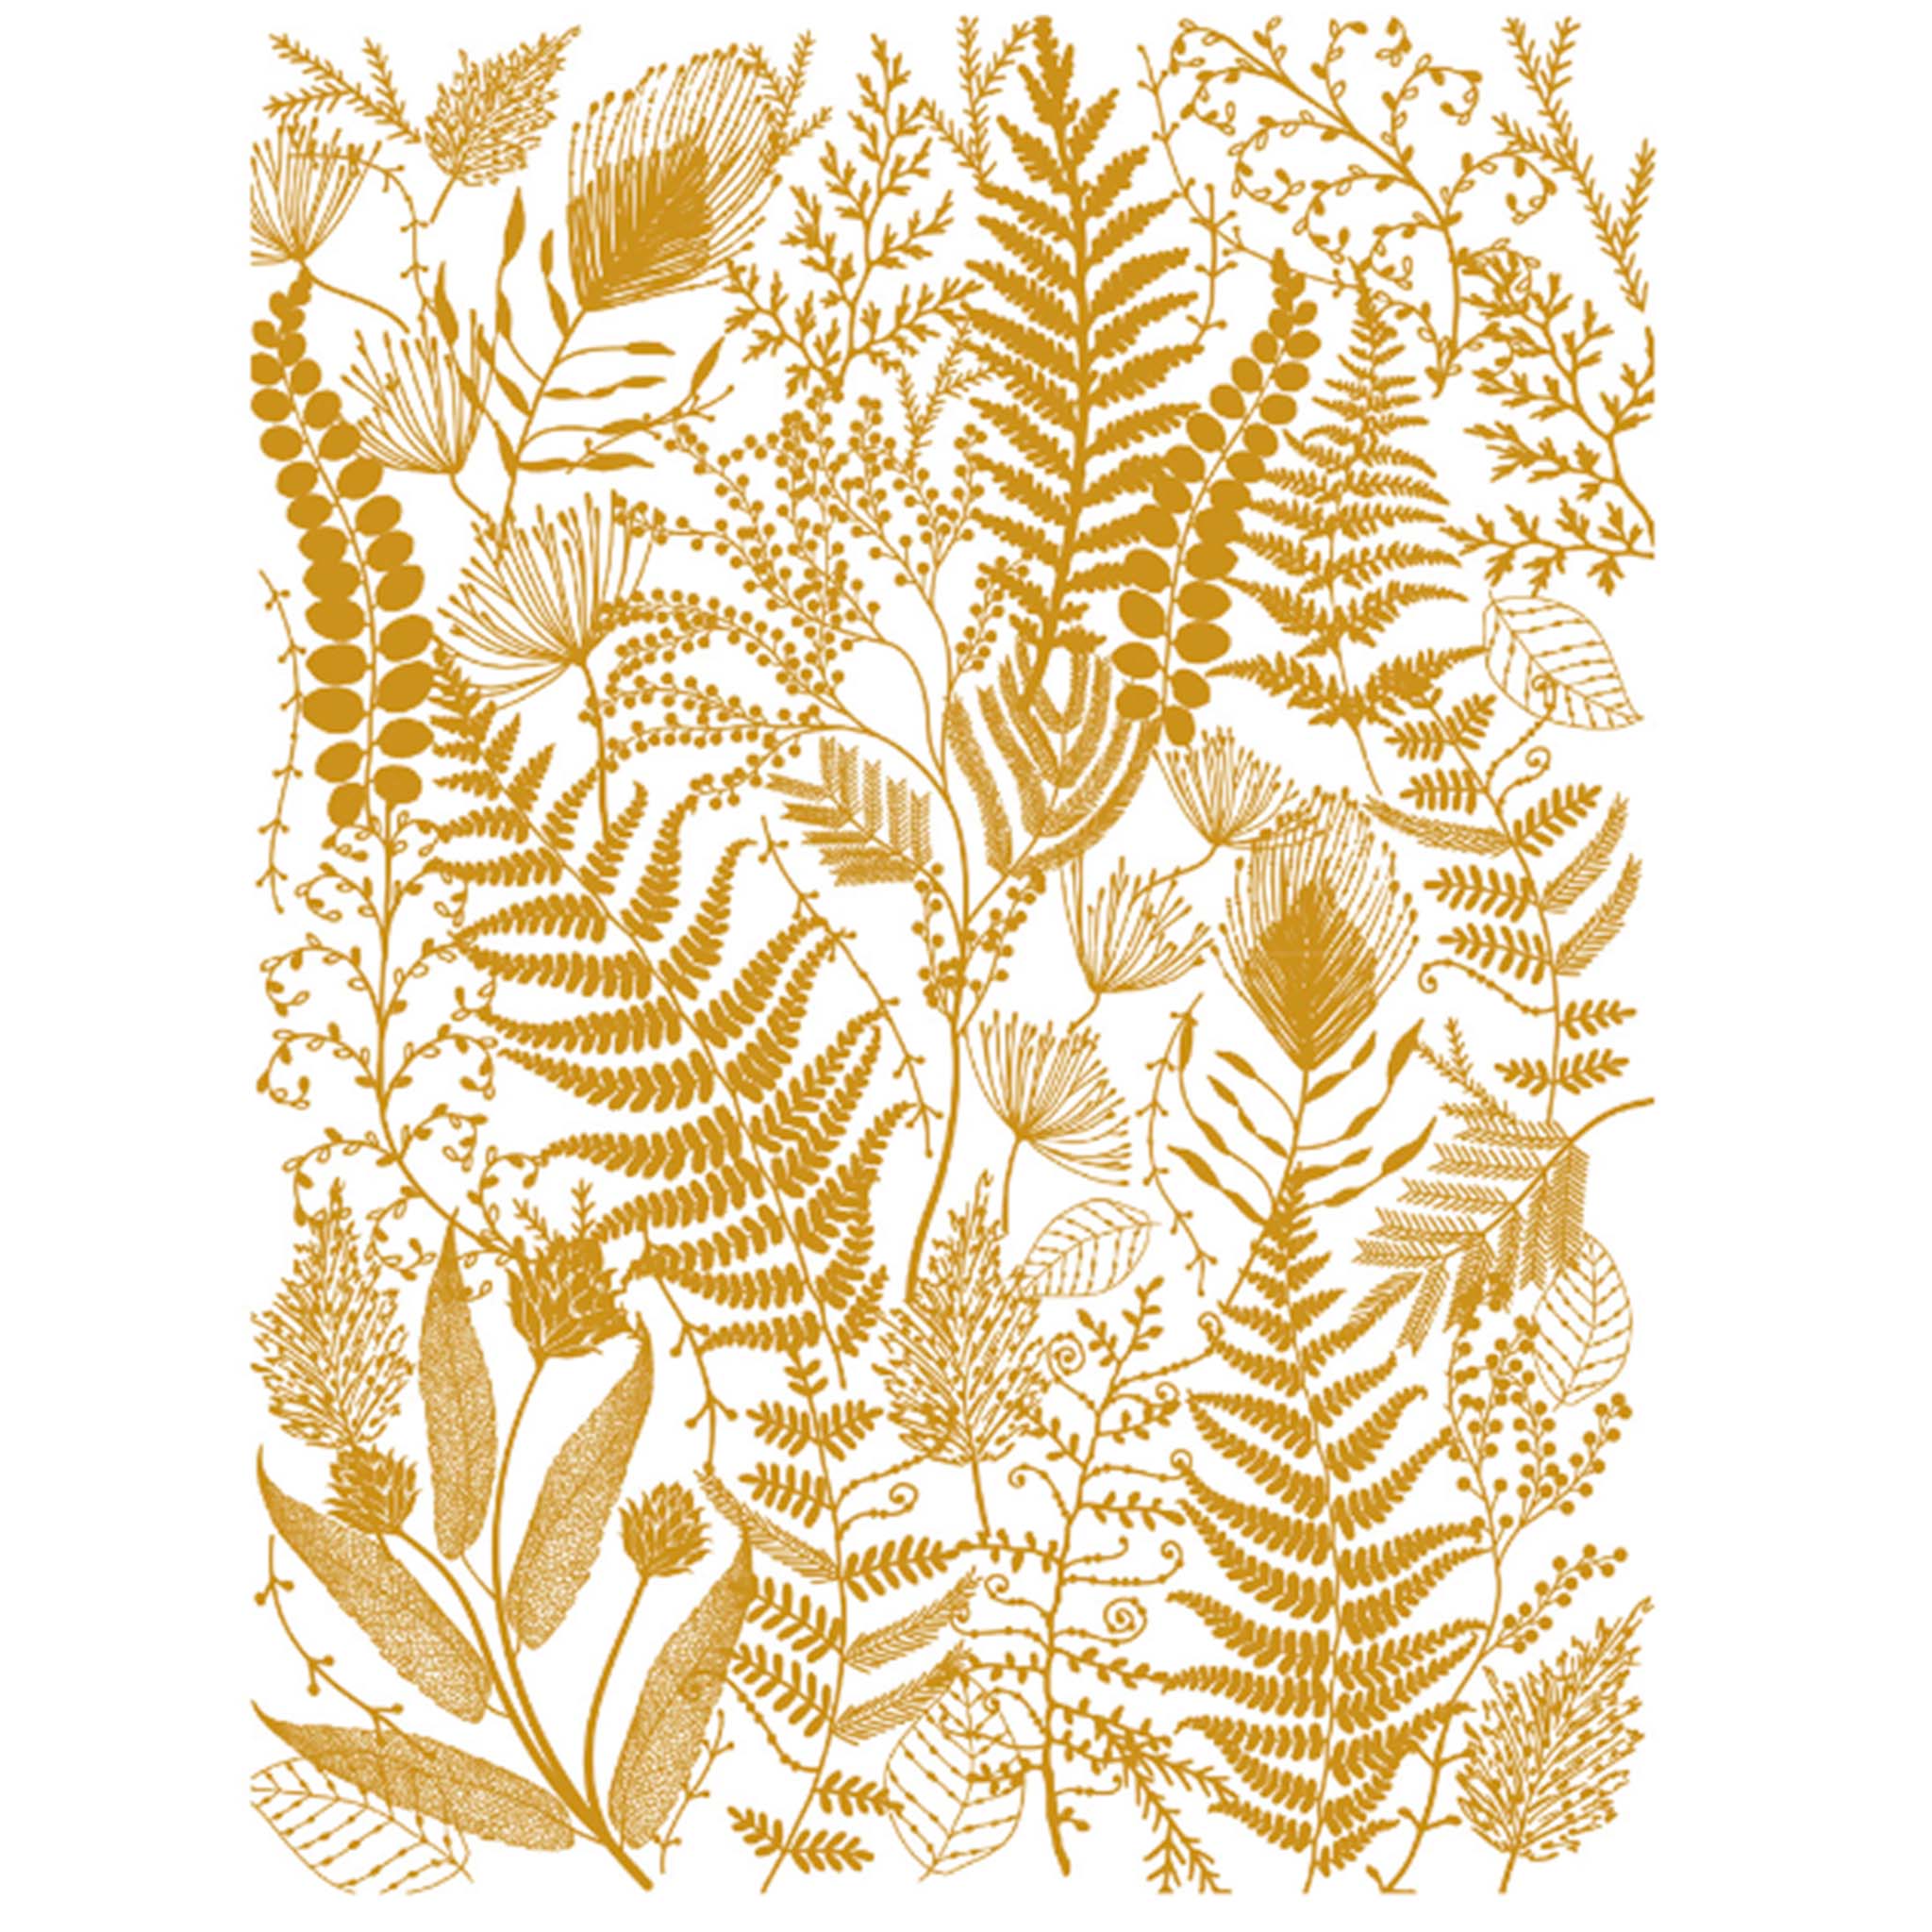 A rub-on furniture transfer against a white background features delicate ferns and petite floral sprigs in gold foil.